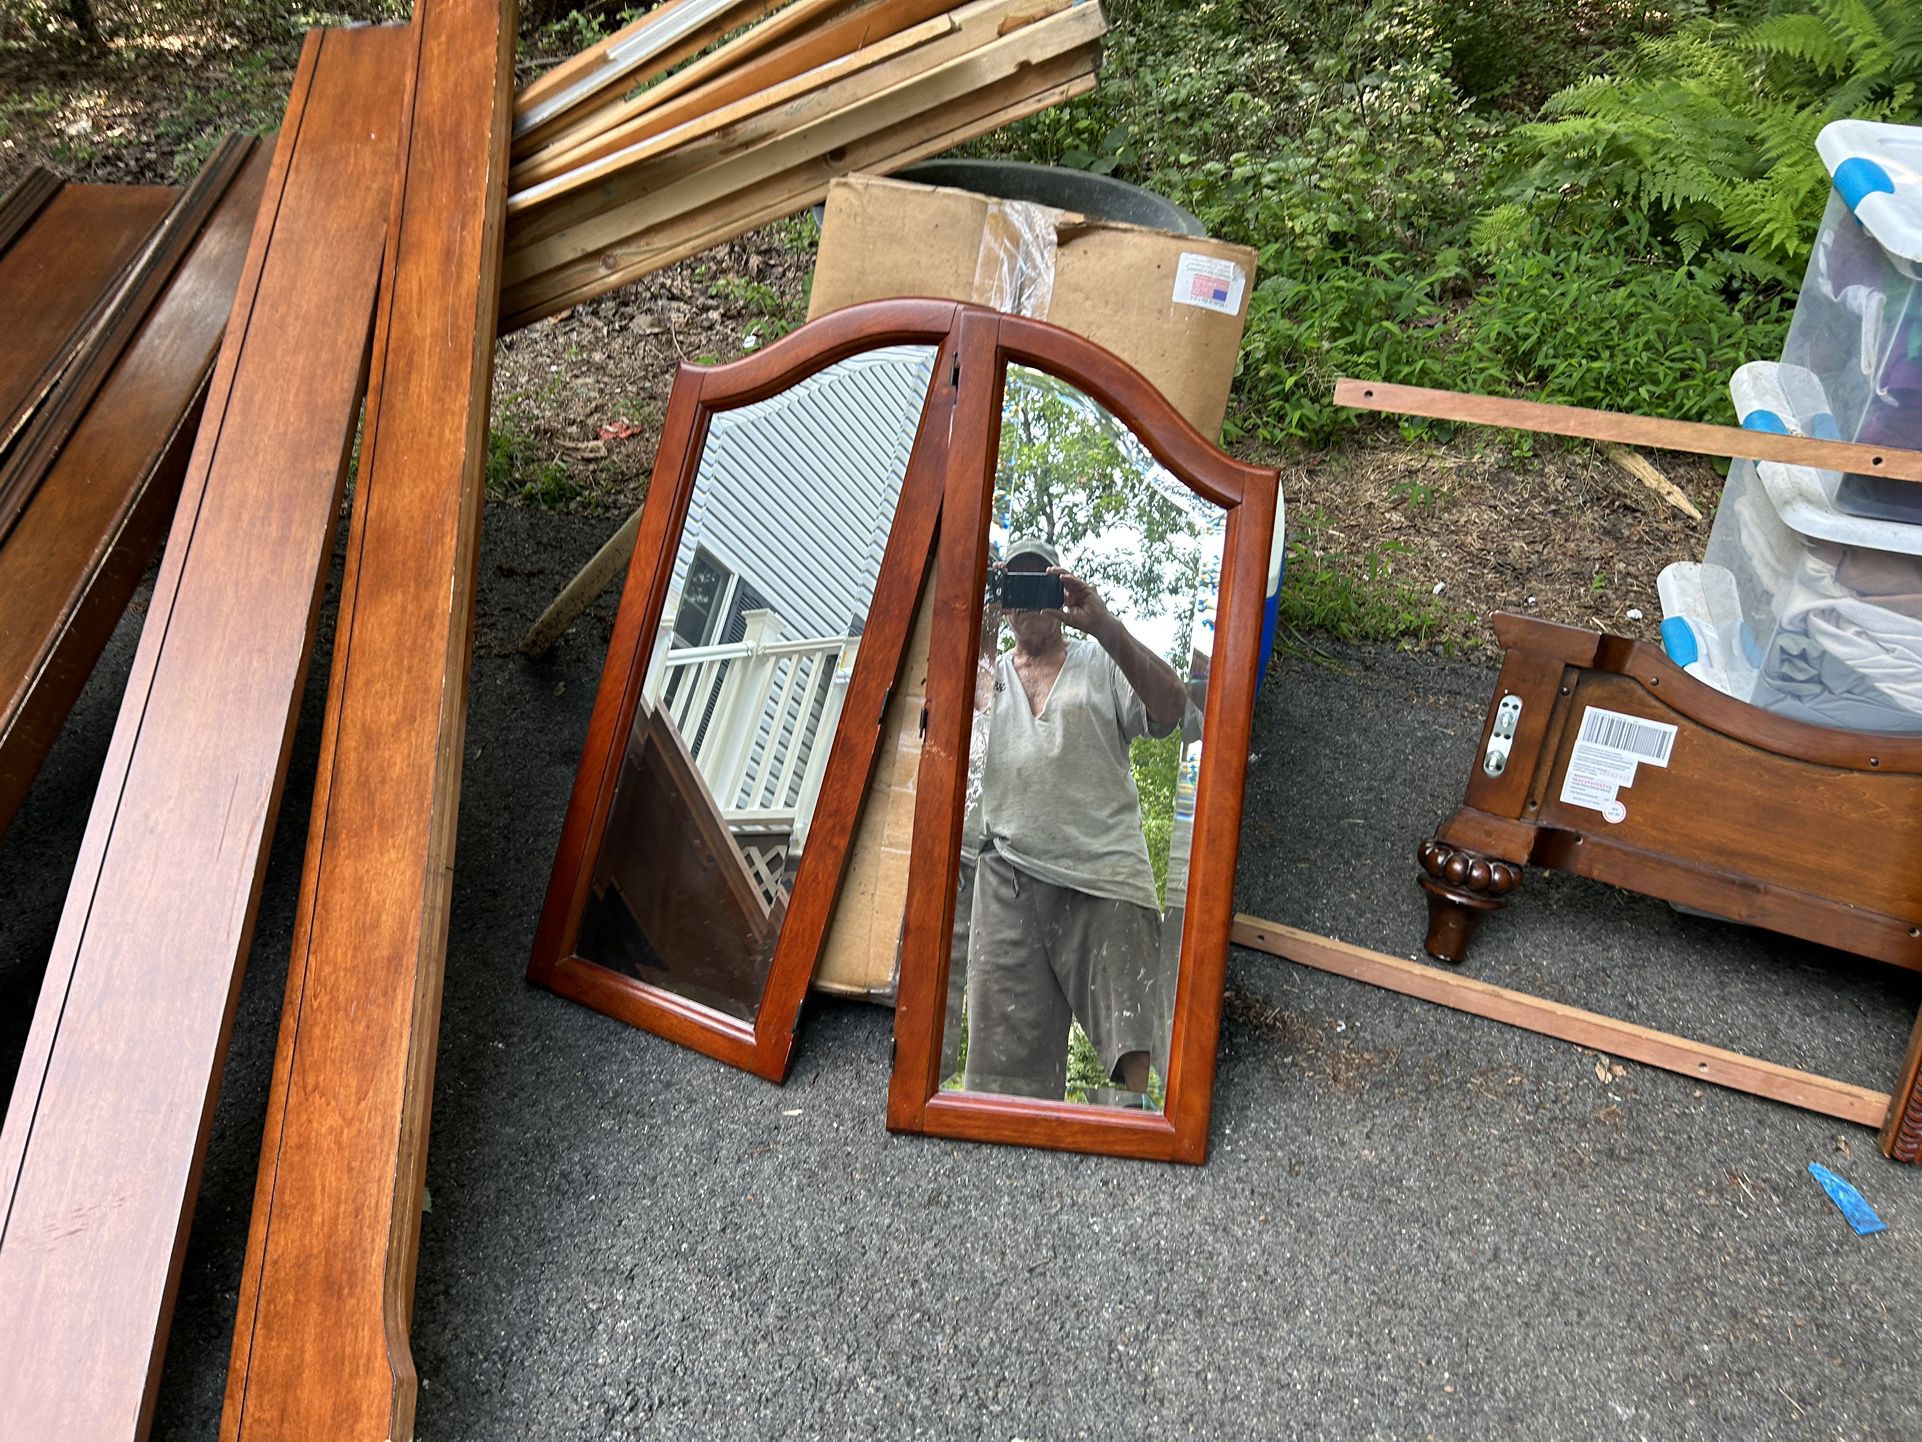 Large Dresser With Attachable Double Hi He’d Mirror